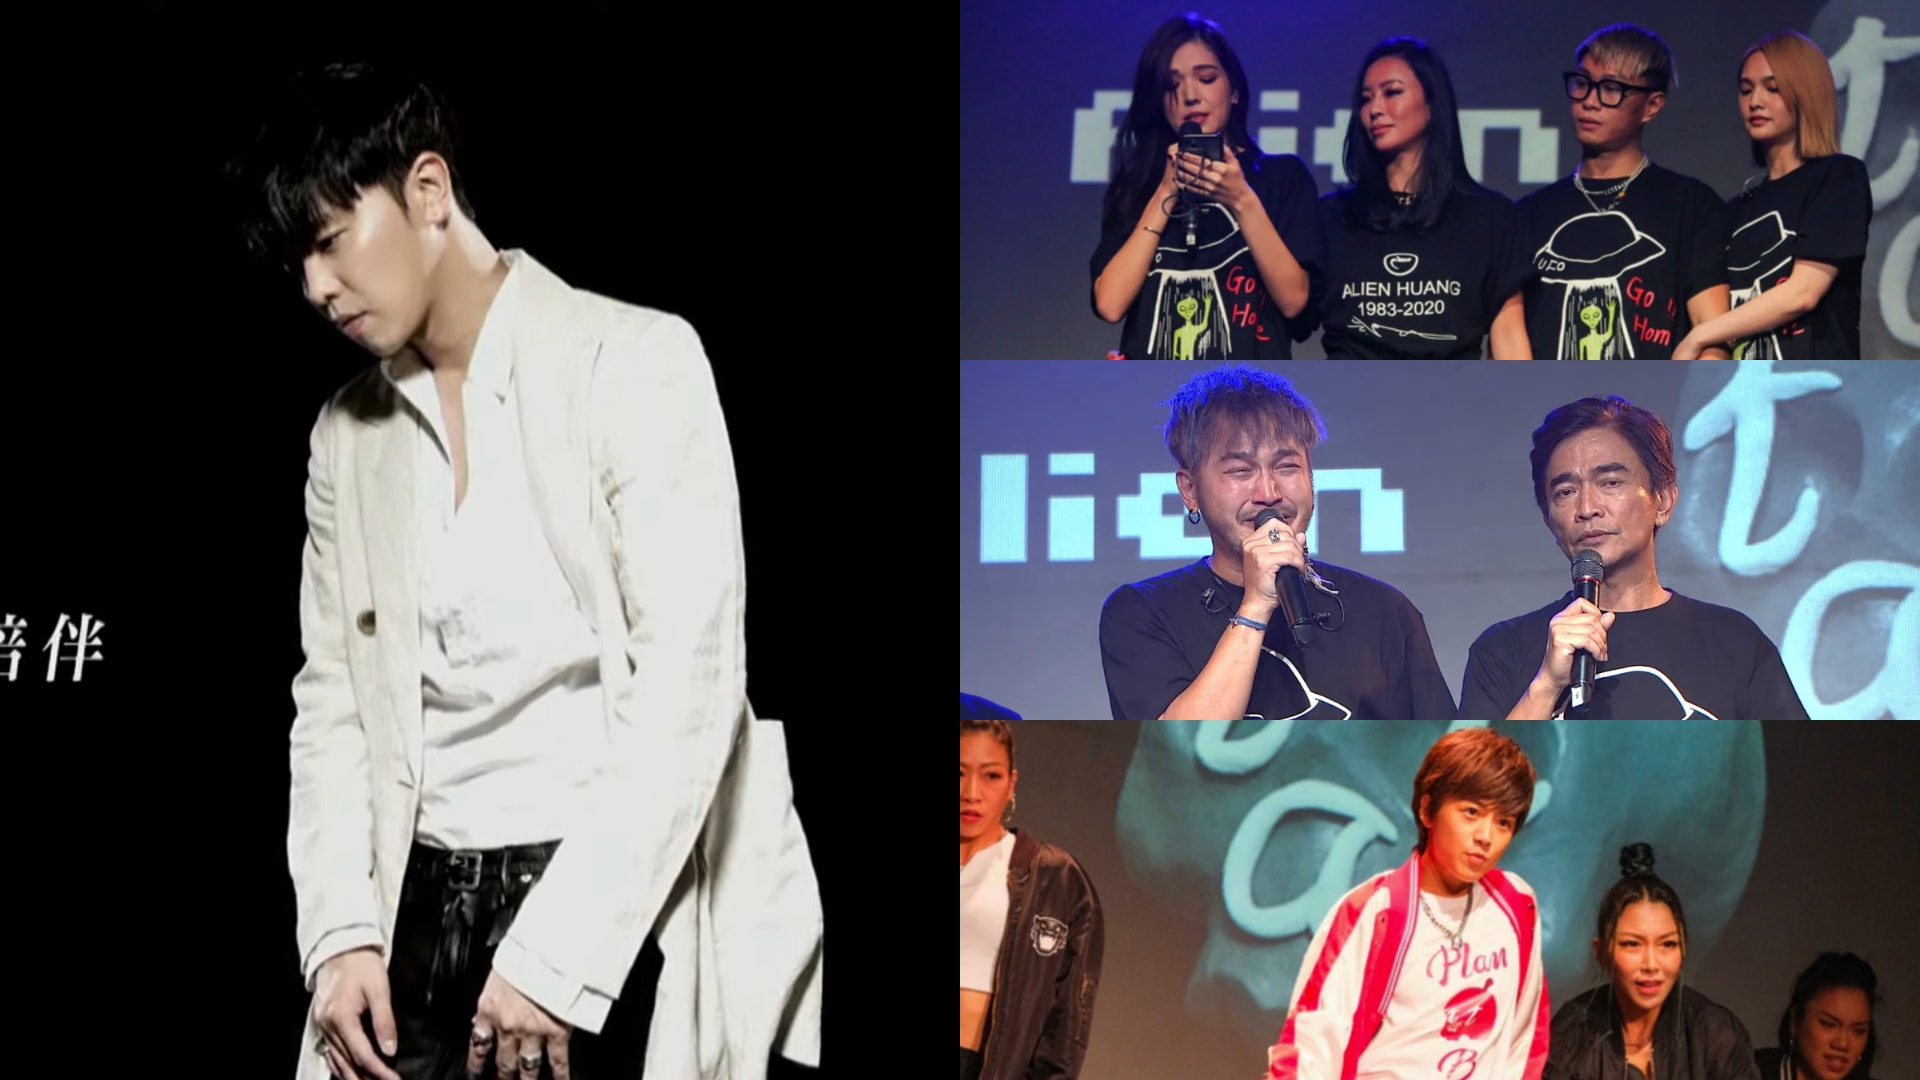 Here’s What Went Down At Alien Huang’s Very Emotional & Star-Studded Memorial Concert